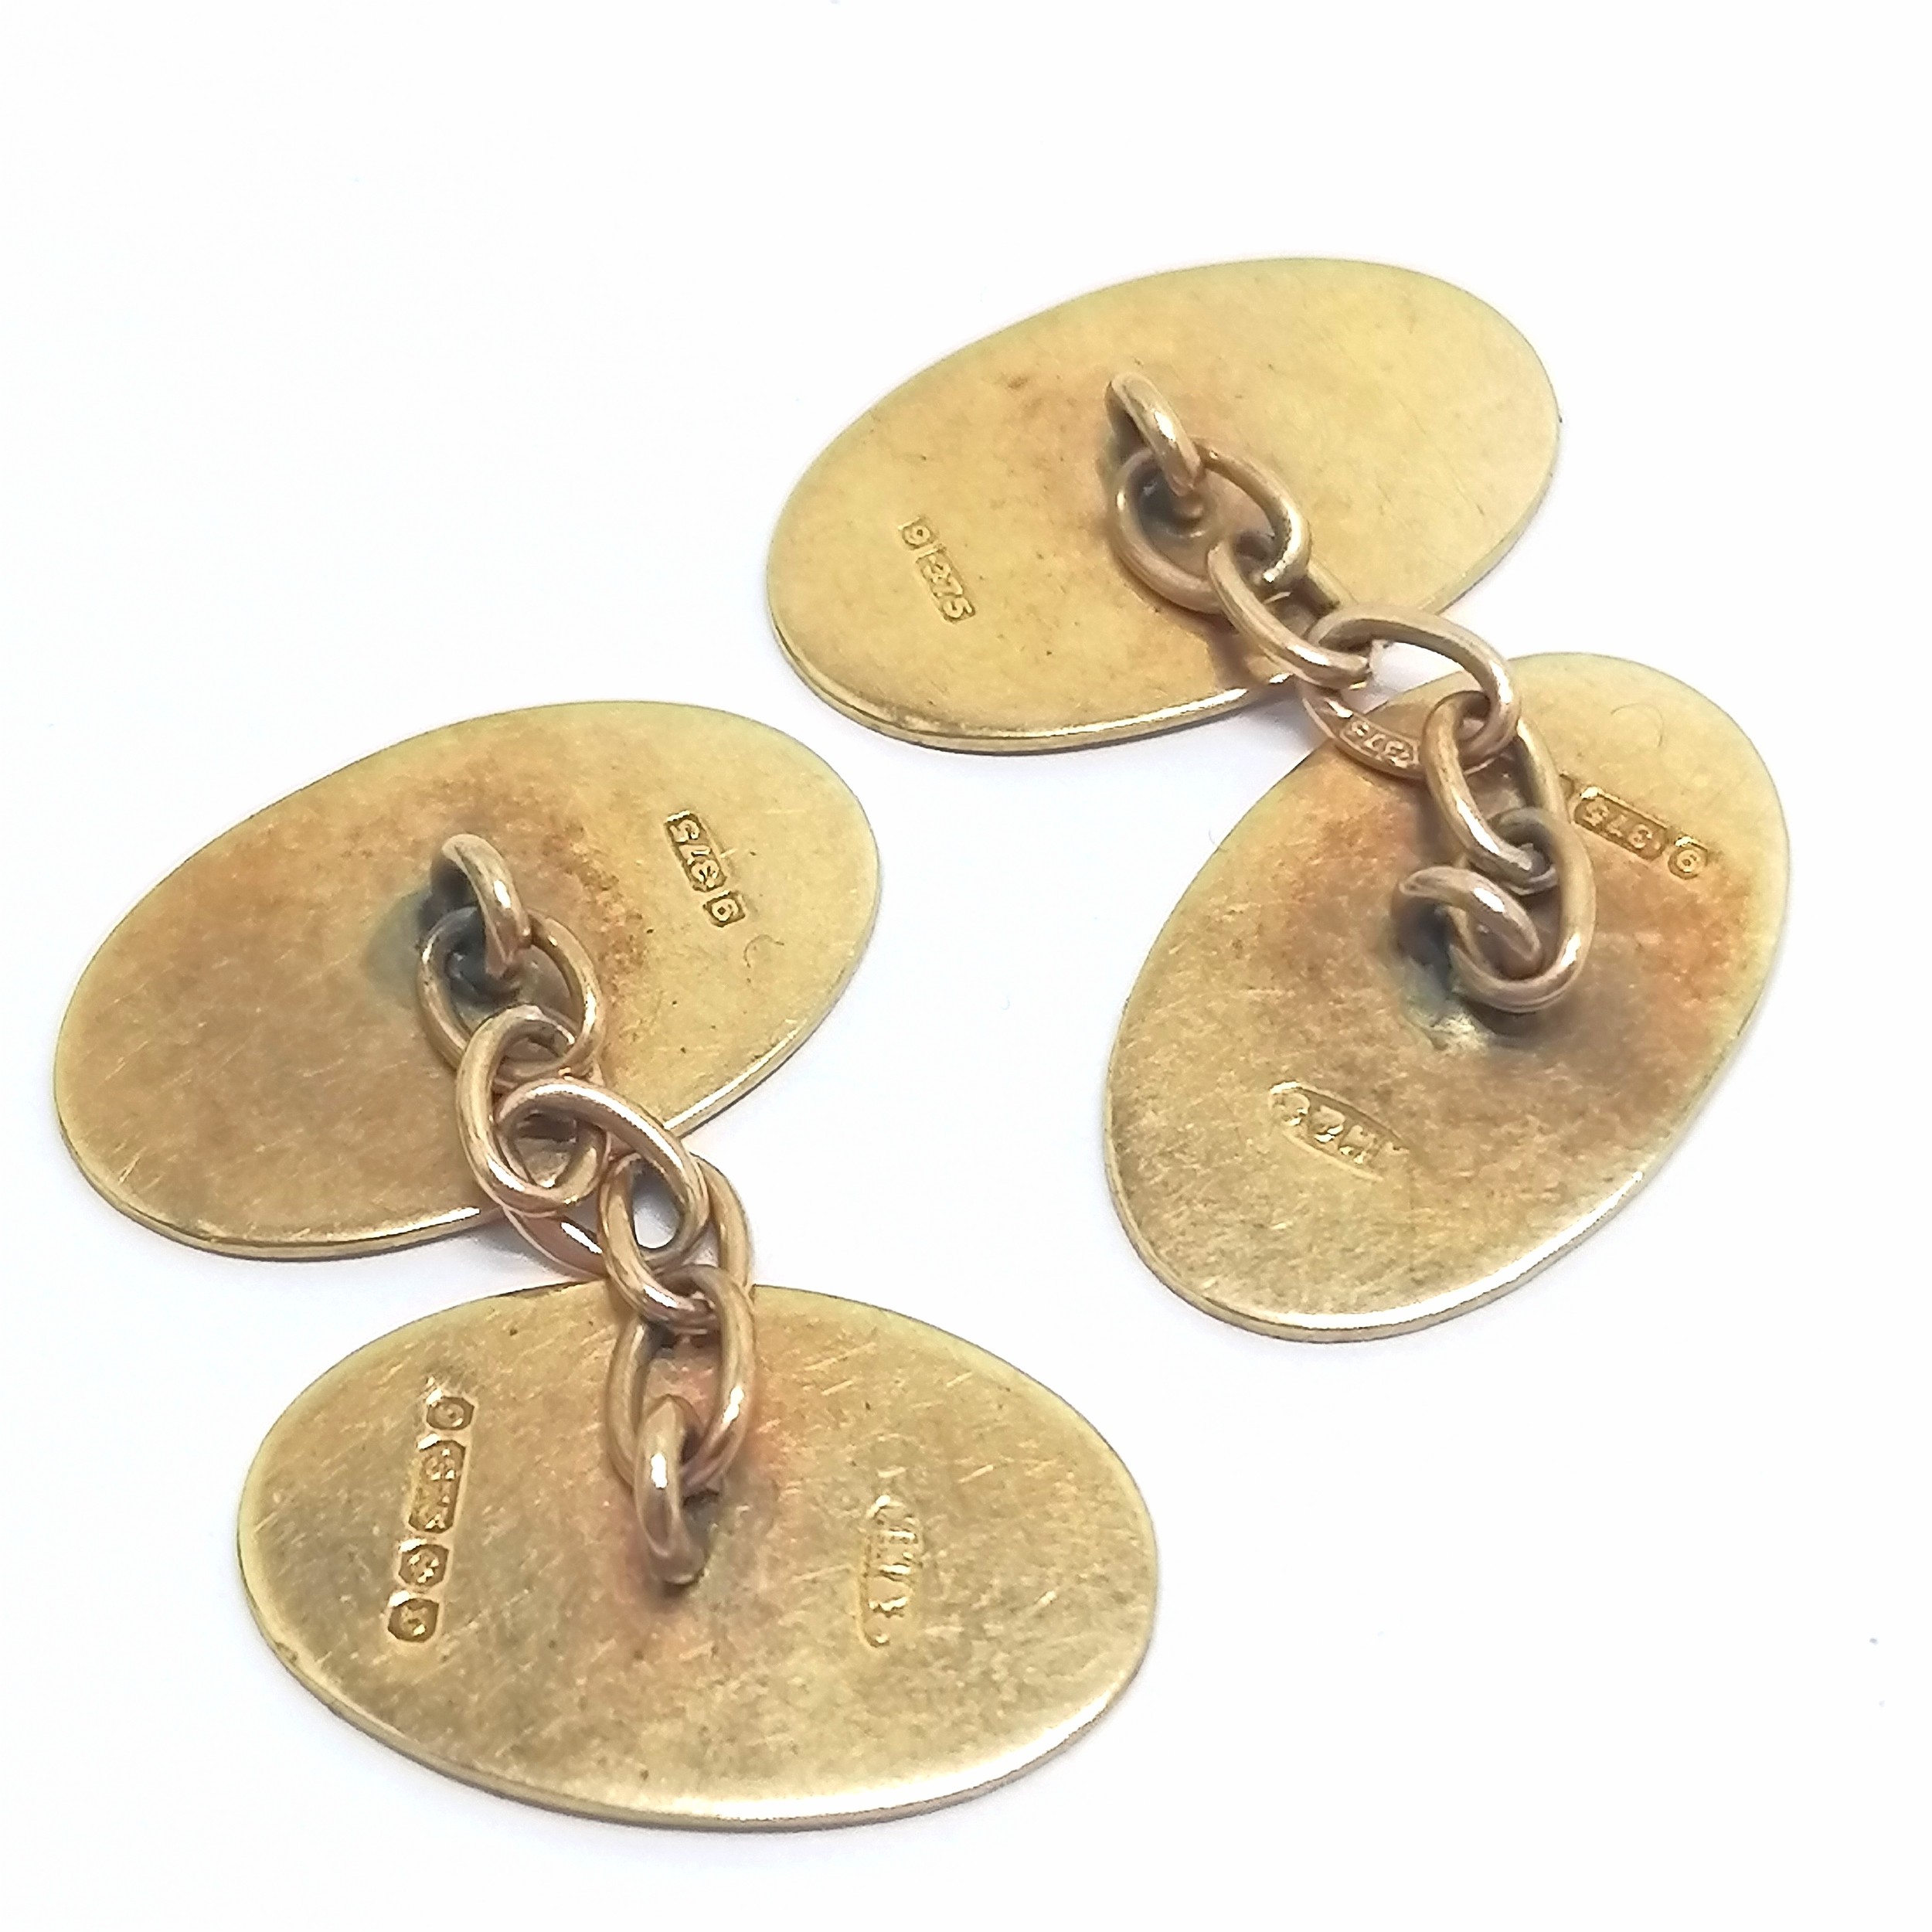 9ct hallmarked gold pair of cufflinks with engine turned decoration - 4.2g with no obvious damage - Image 2 of 2